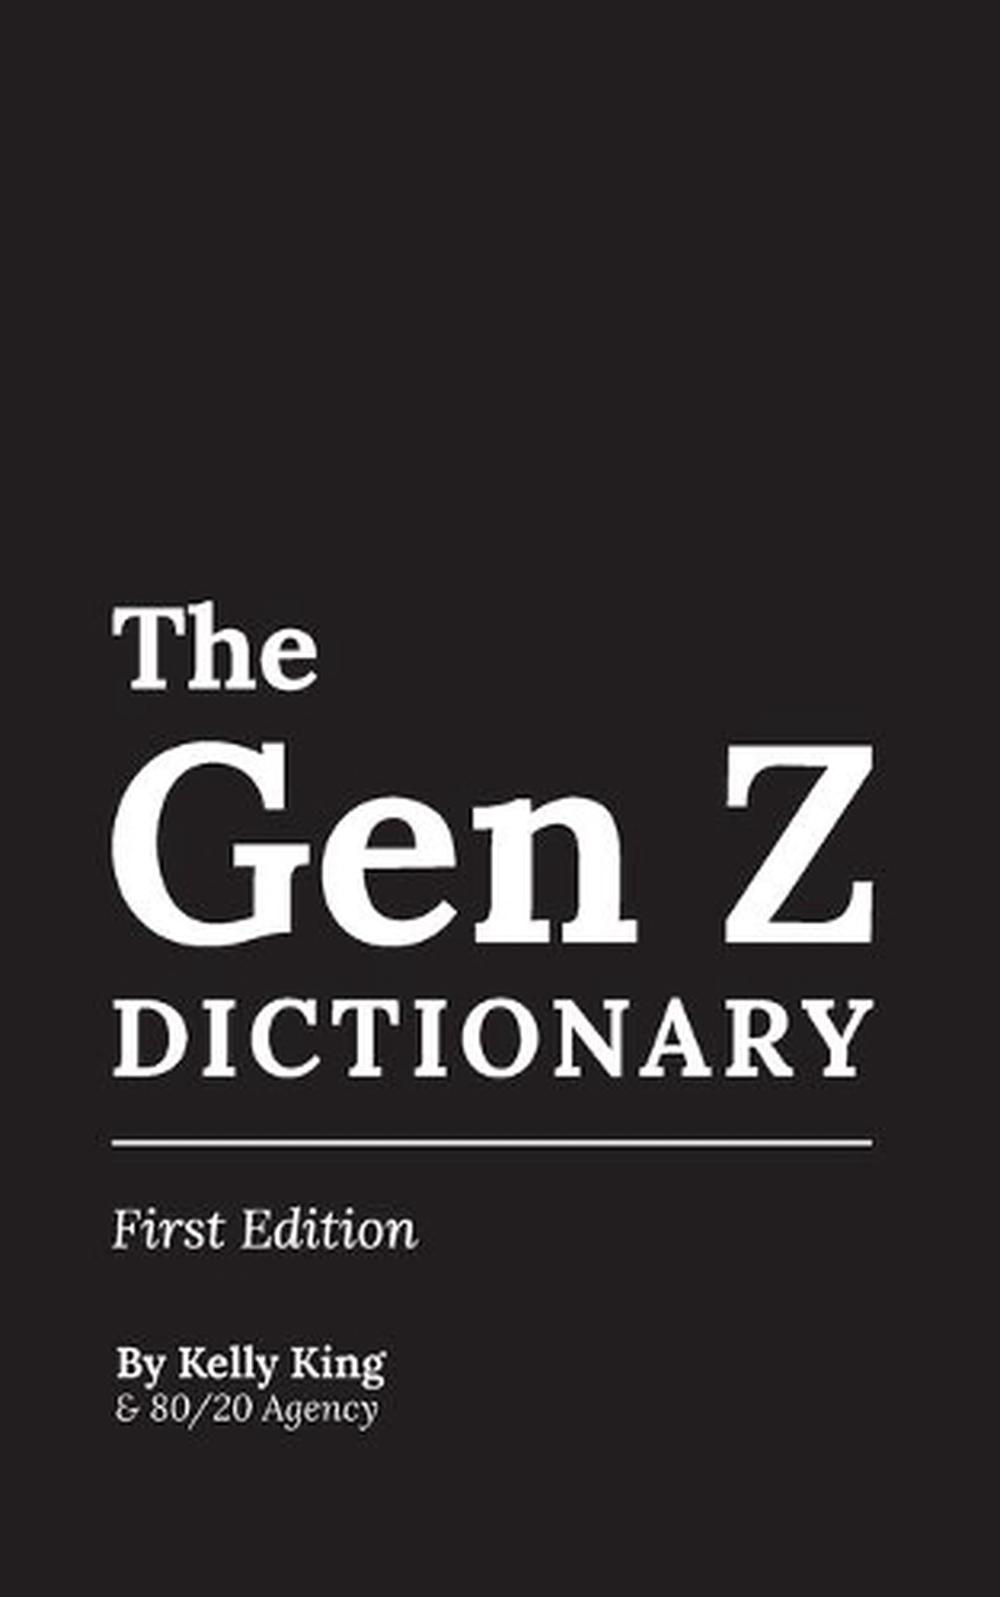 The Gen Z Dictionary by Agency 8020 (English) Paperback Book Free